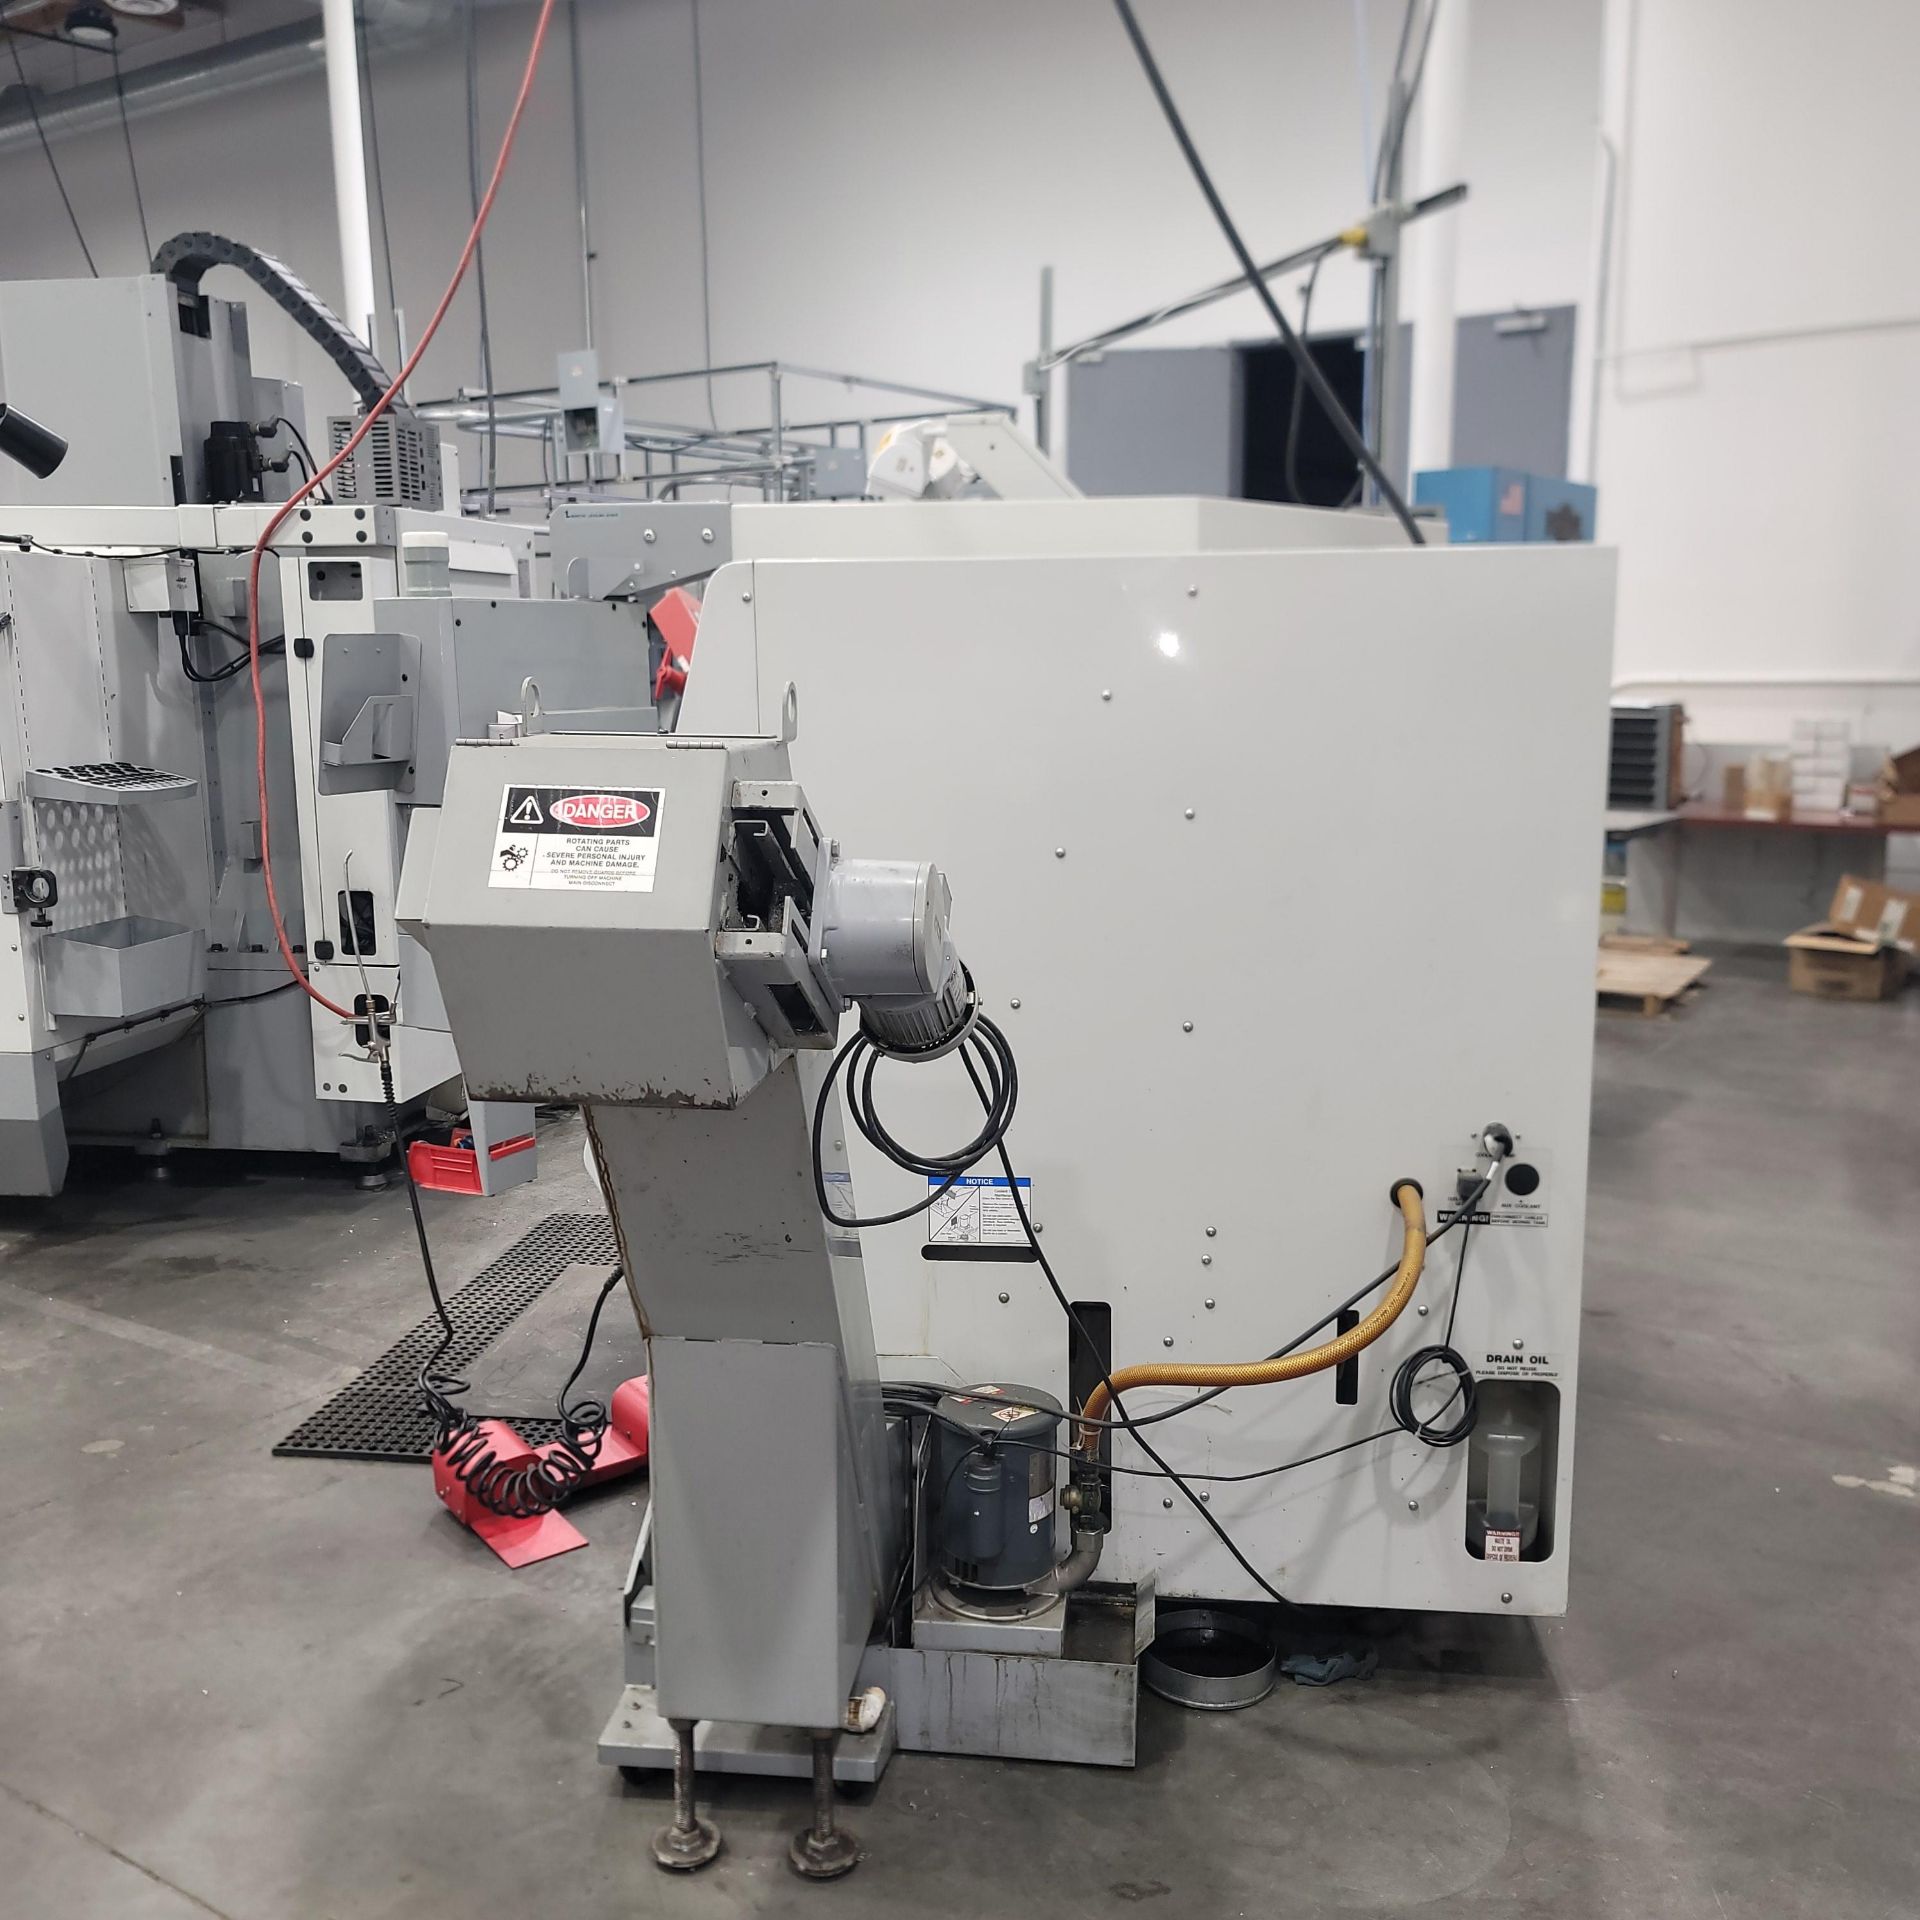 2007 HAAS SL-20T TURNING CENTER, 8" CHUCK, 5C COLLET NOSE, TAILSTOCK, 10-STATION TURRET, 2.0" BAR - Image 8 of 13